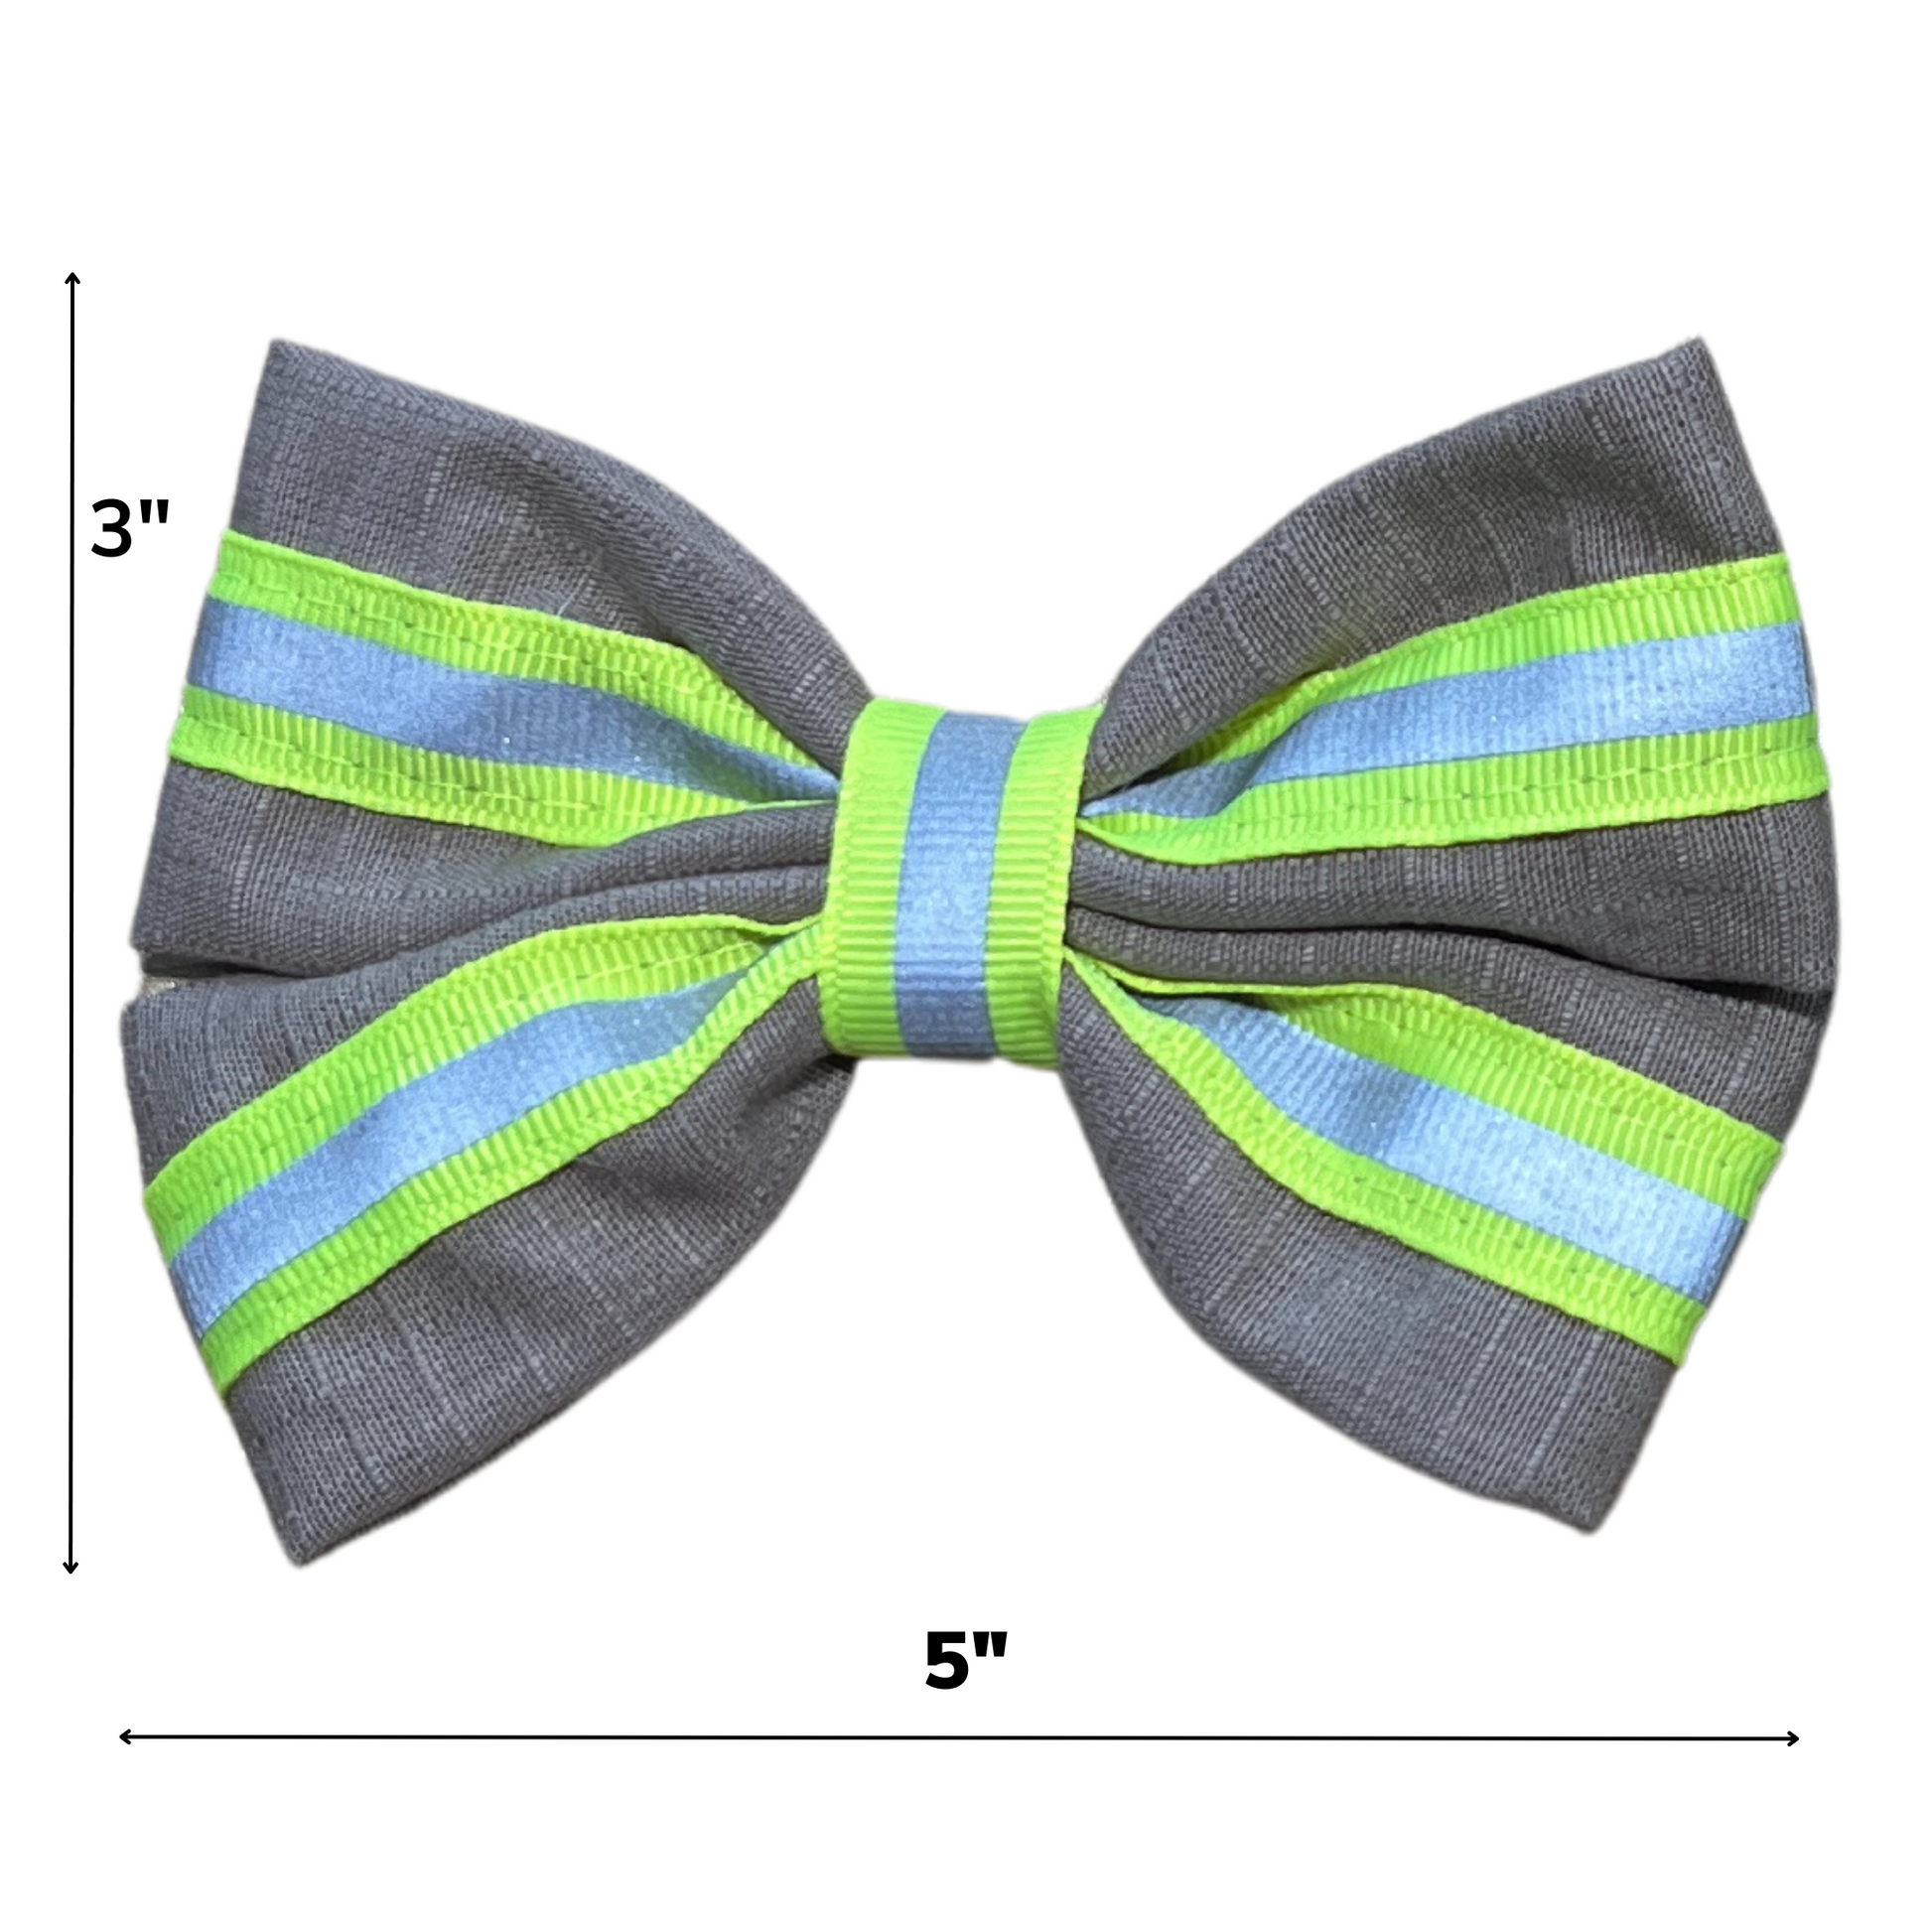 Firefighter Hair Bow size. 5 inches across and 3 inches tall